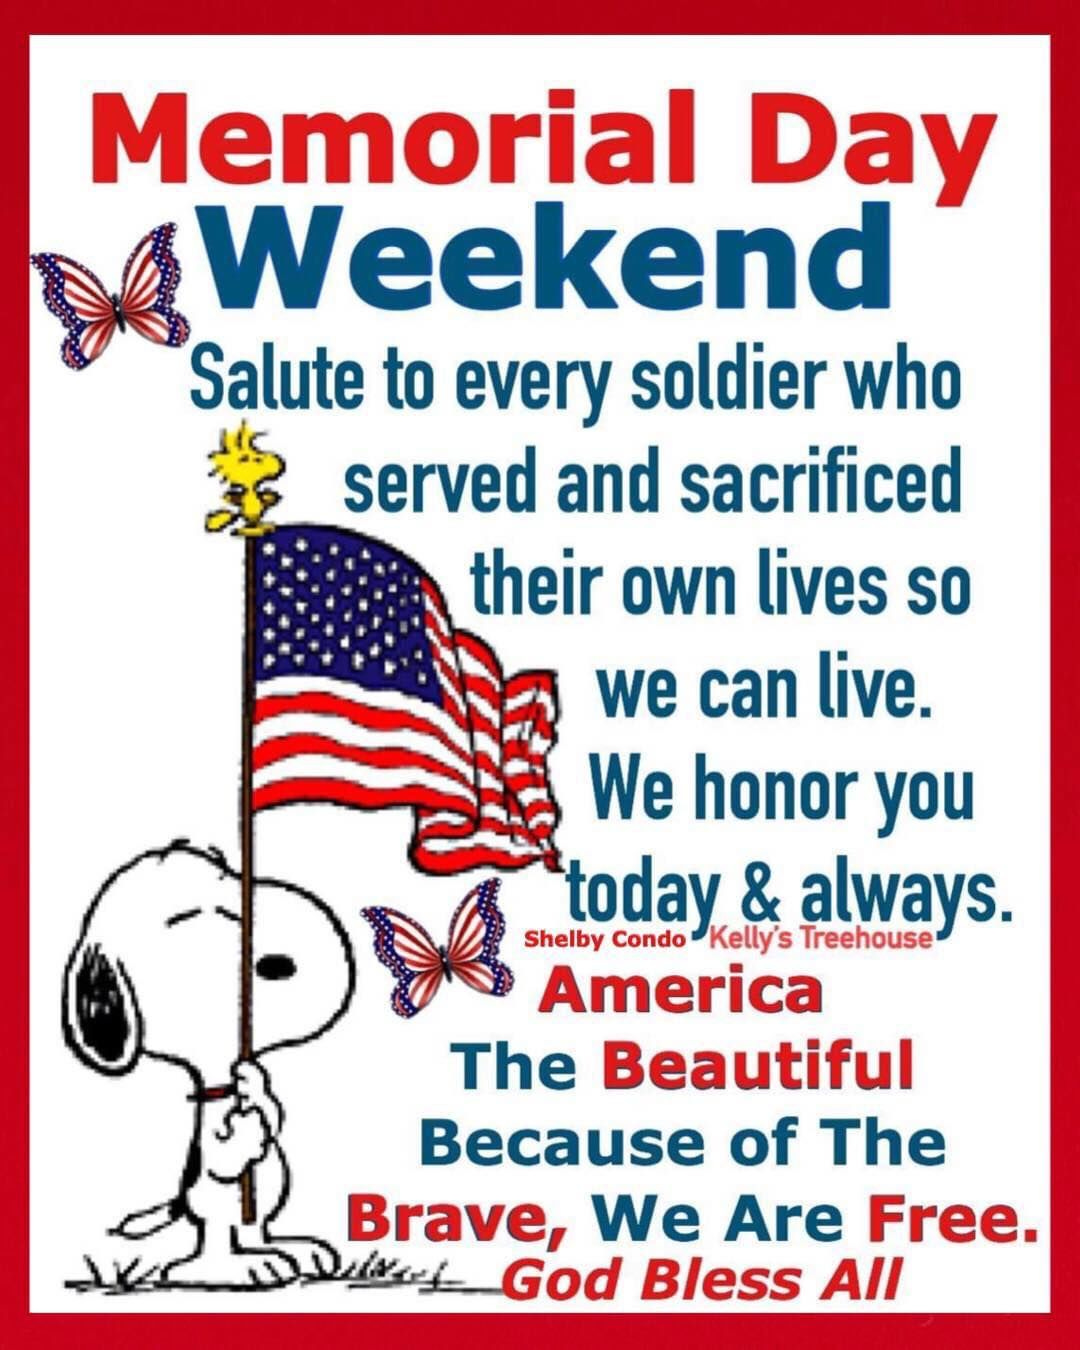 Snoopy's Memorial Day Weekend Quotes Pictures, Photos, and Images for  Facebook, Tumblr, Pinterest, and Twitter